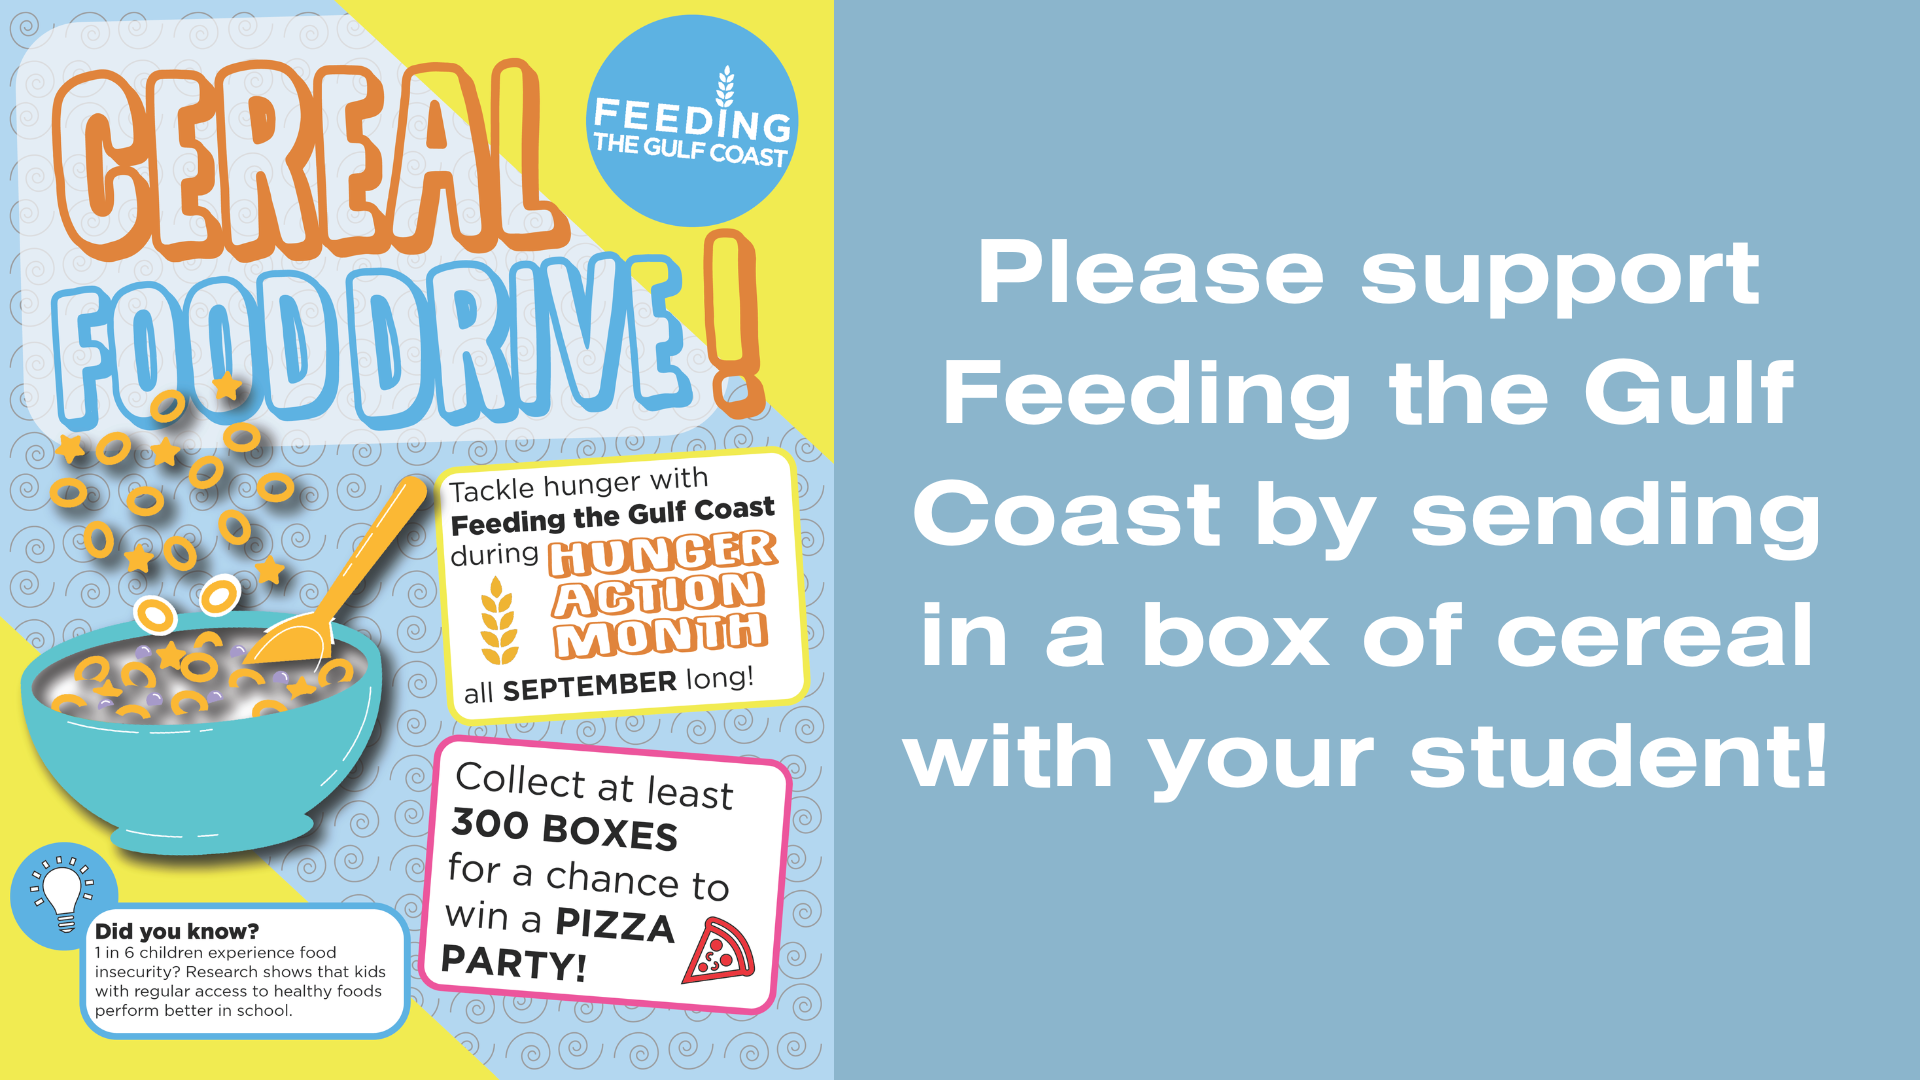 Cereal Drive for Feeding the Gulf Coast